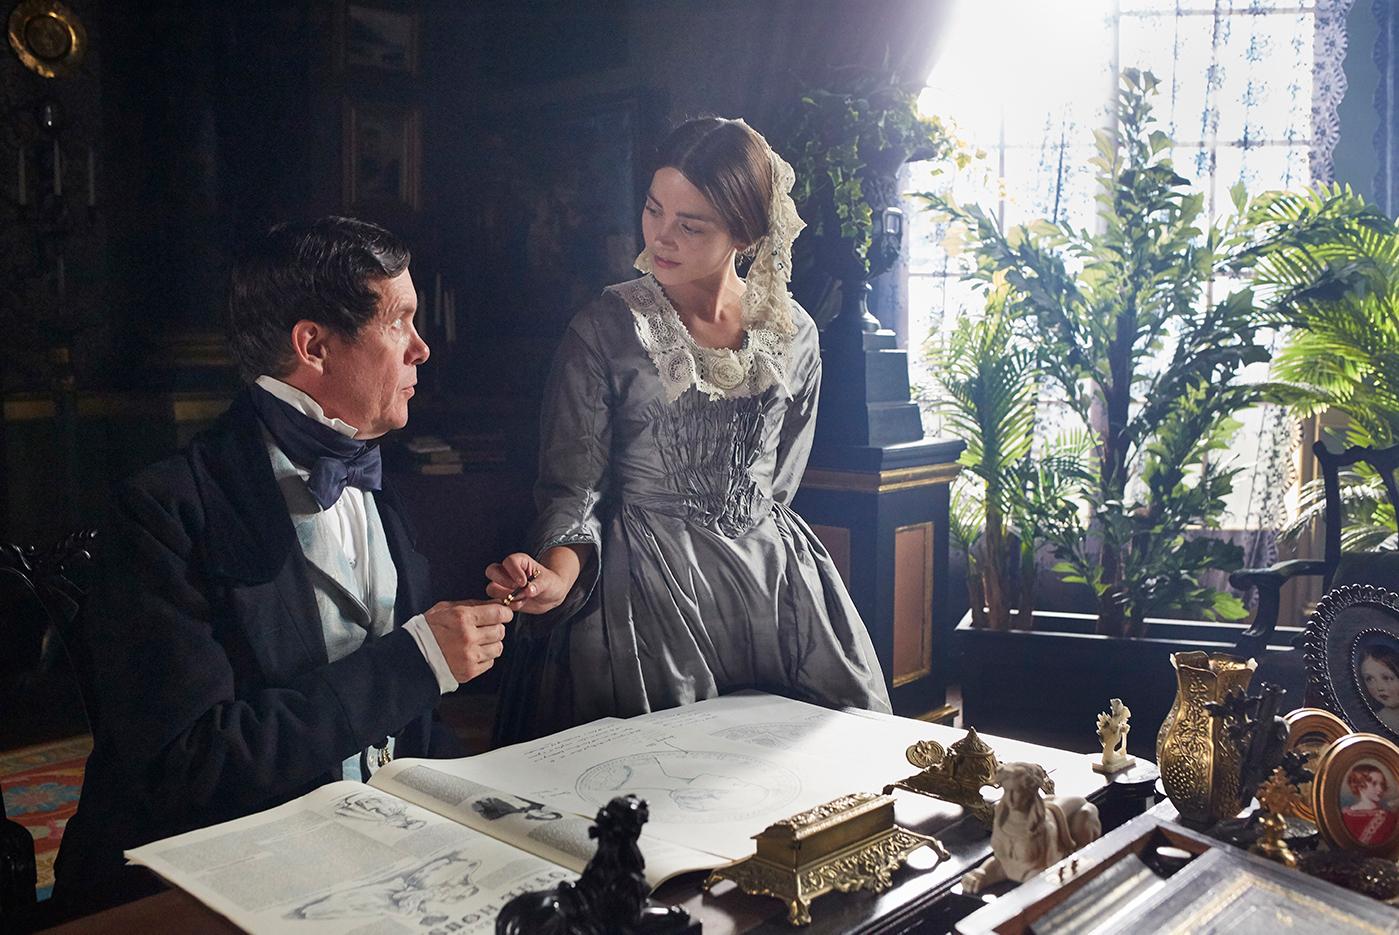 King Leopold and Queen Victoria, season 3 of Victoria. Photo: Justin Slee/ITV Plc for MASTERPIECE